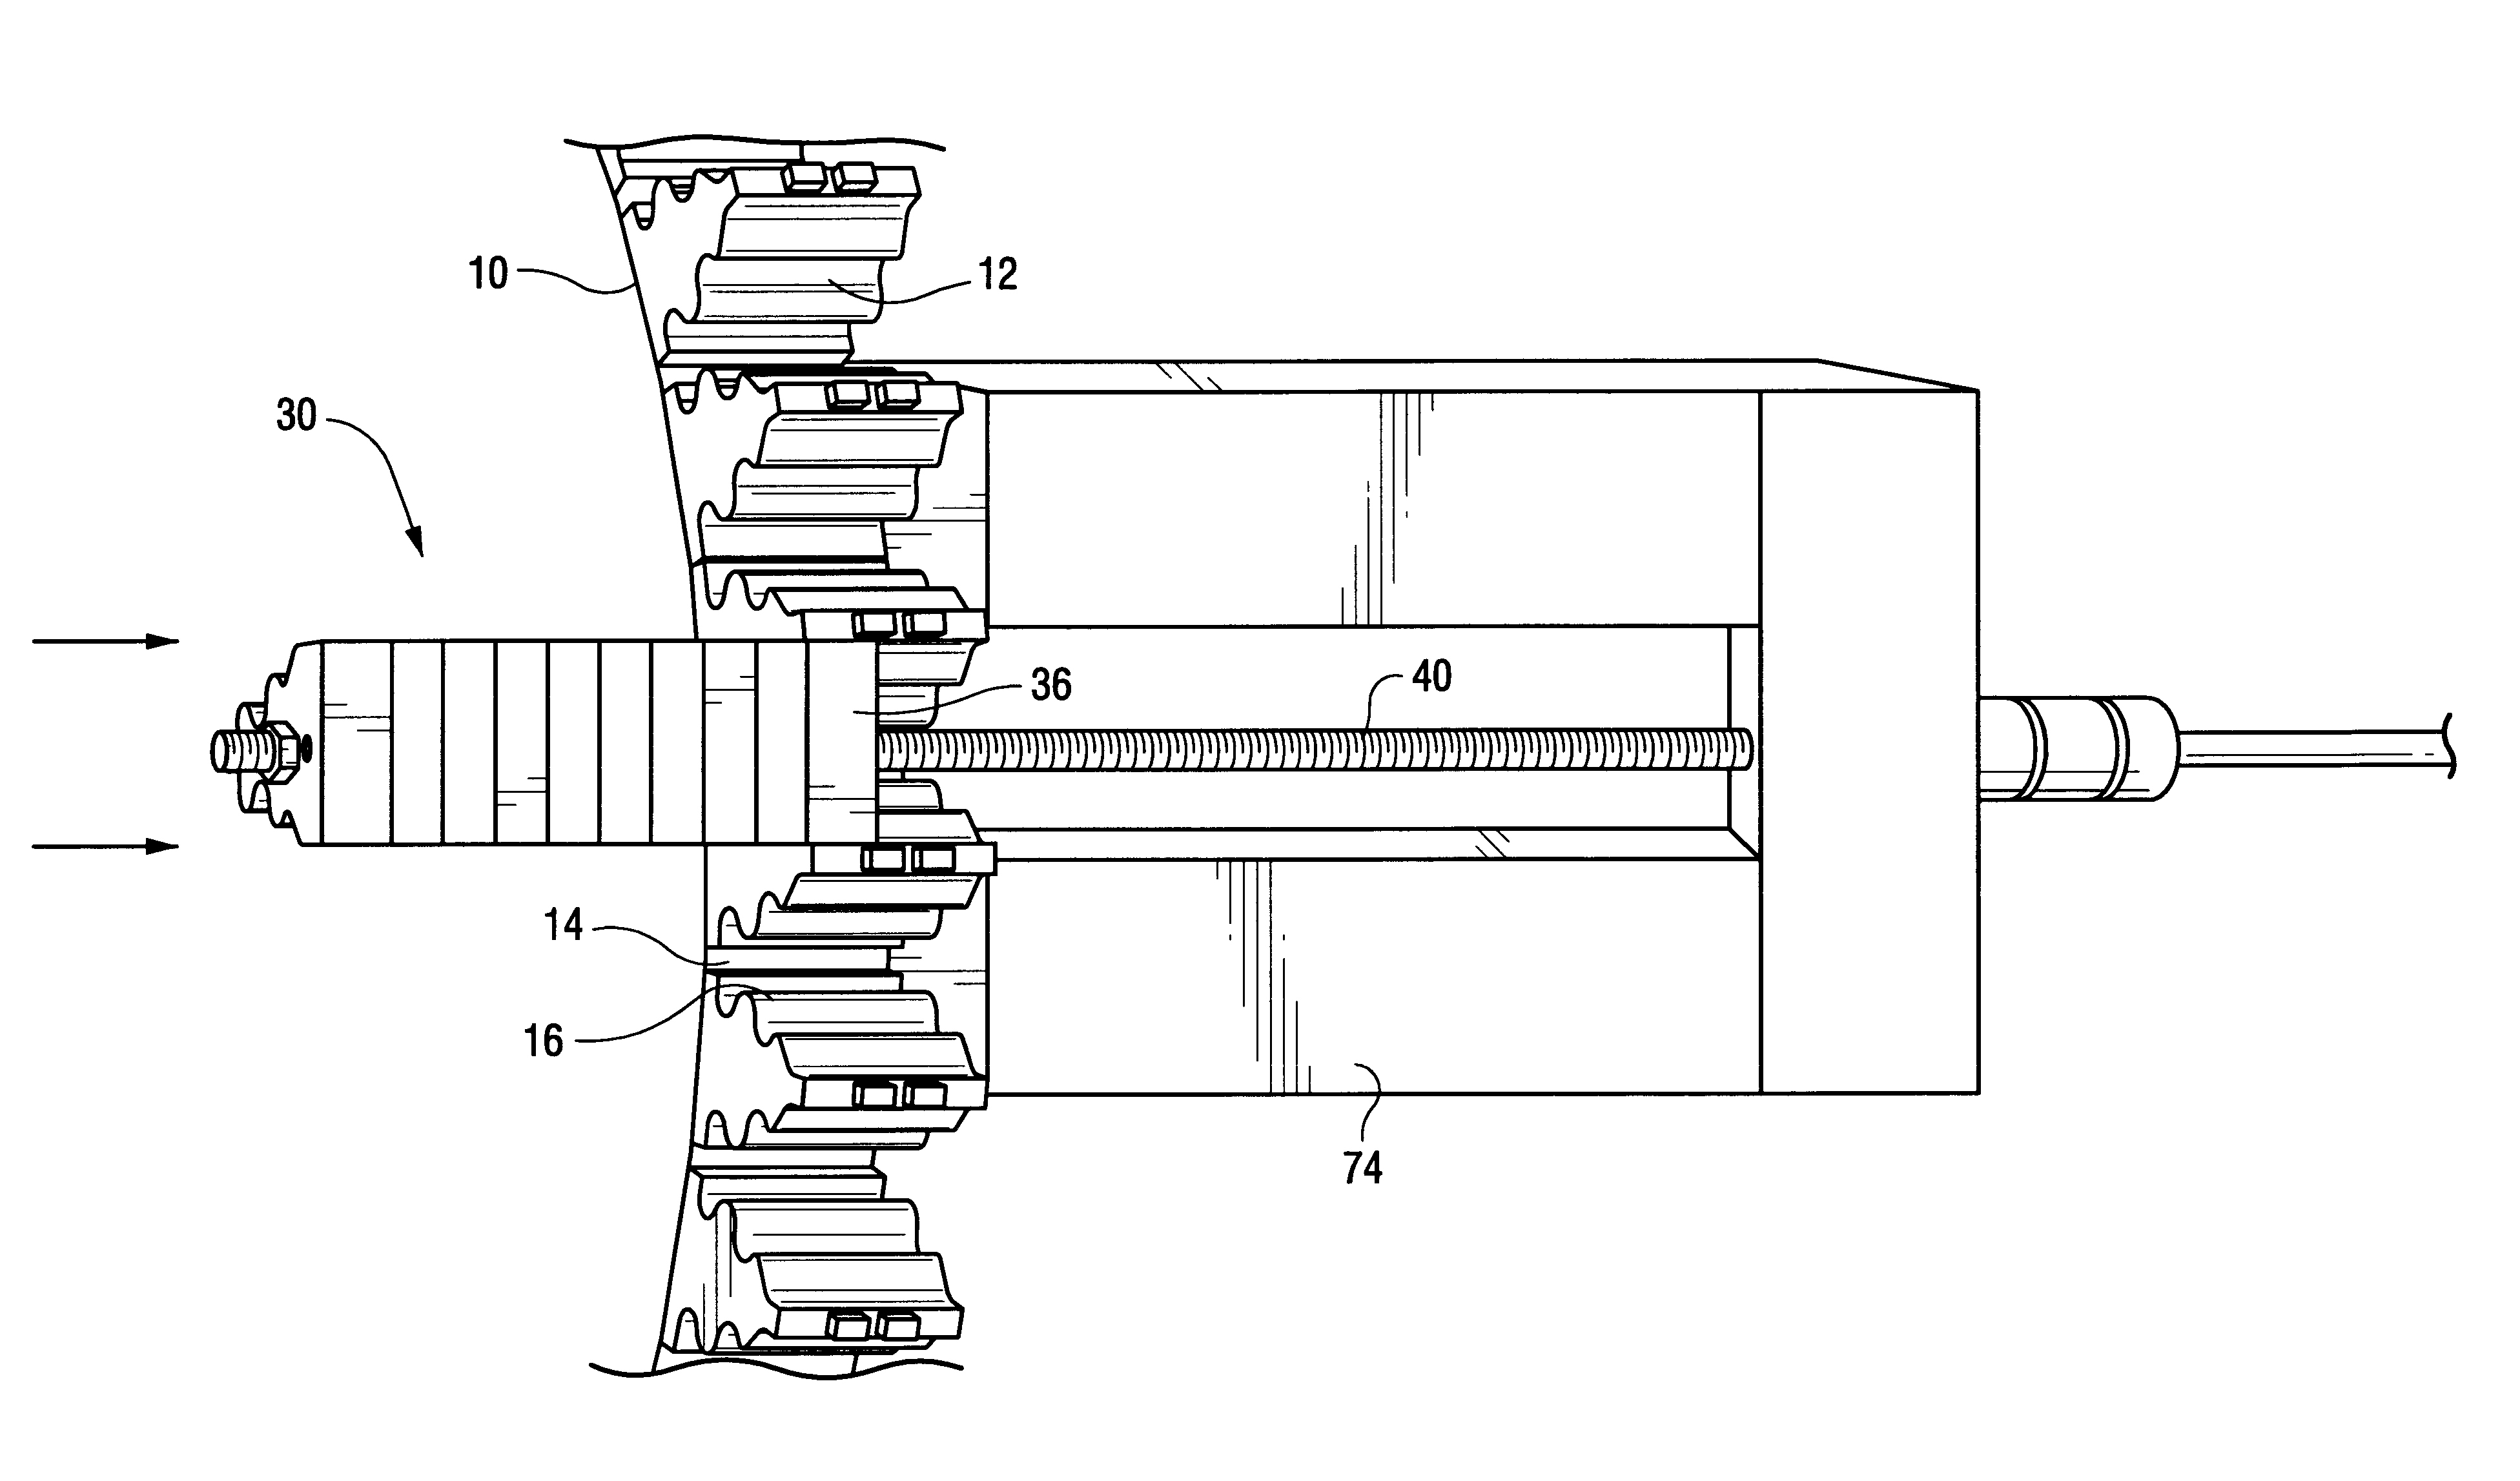 Multi-part dovetail repair broach assembly and methods of use